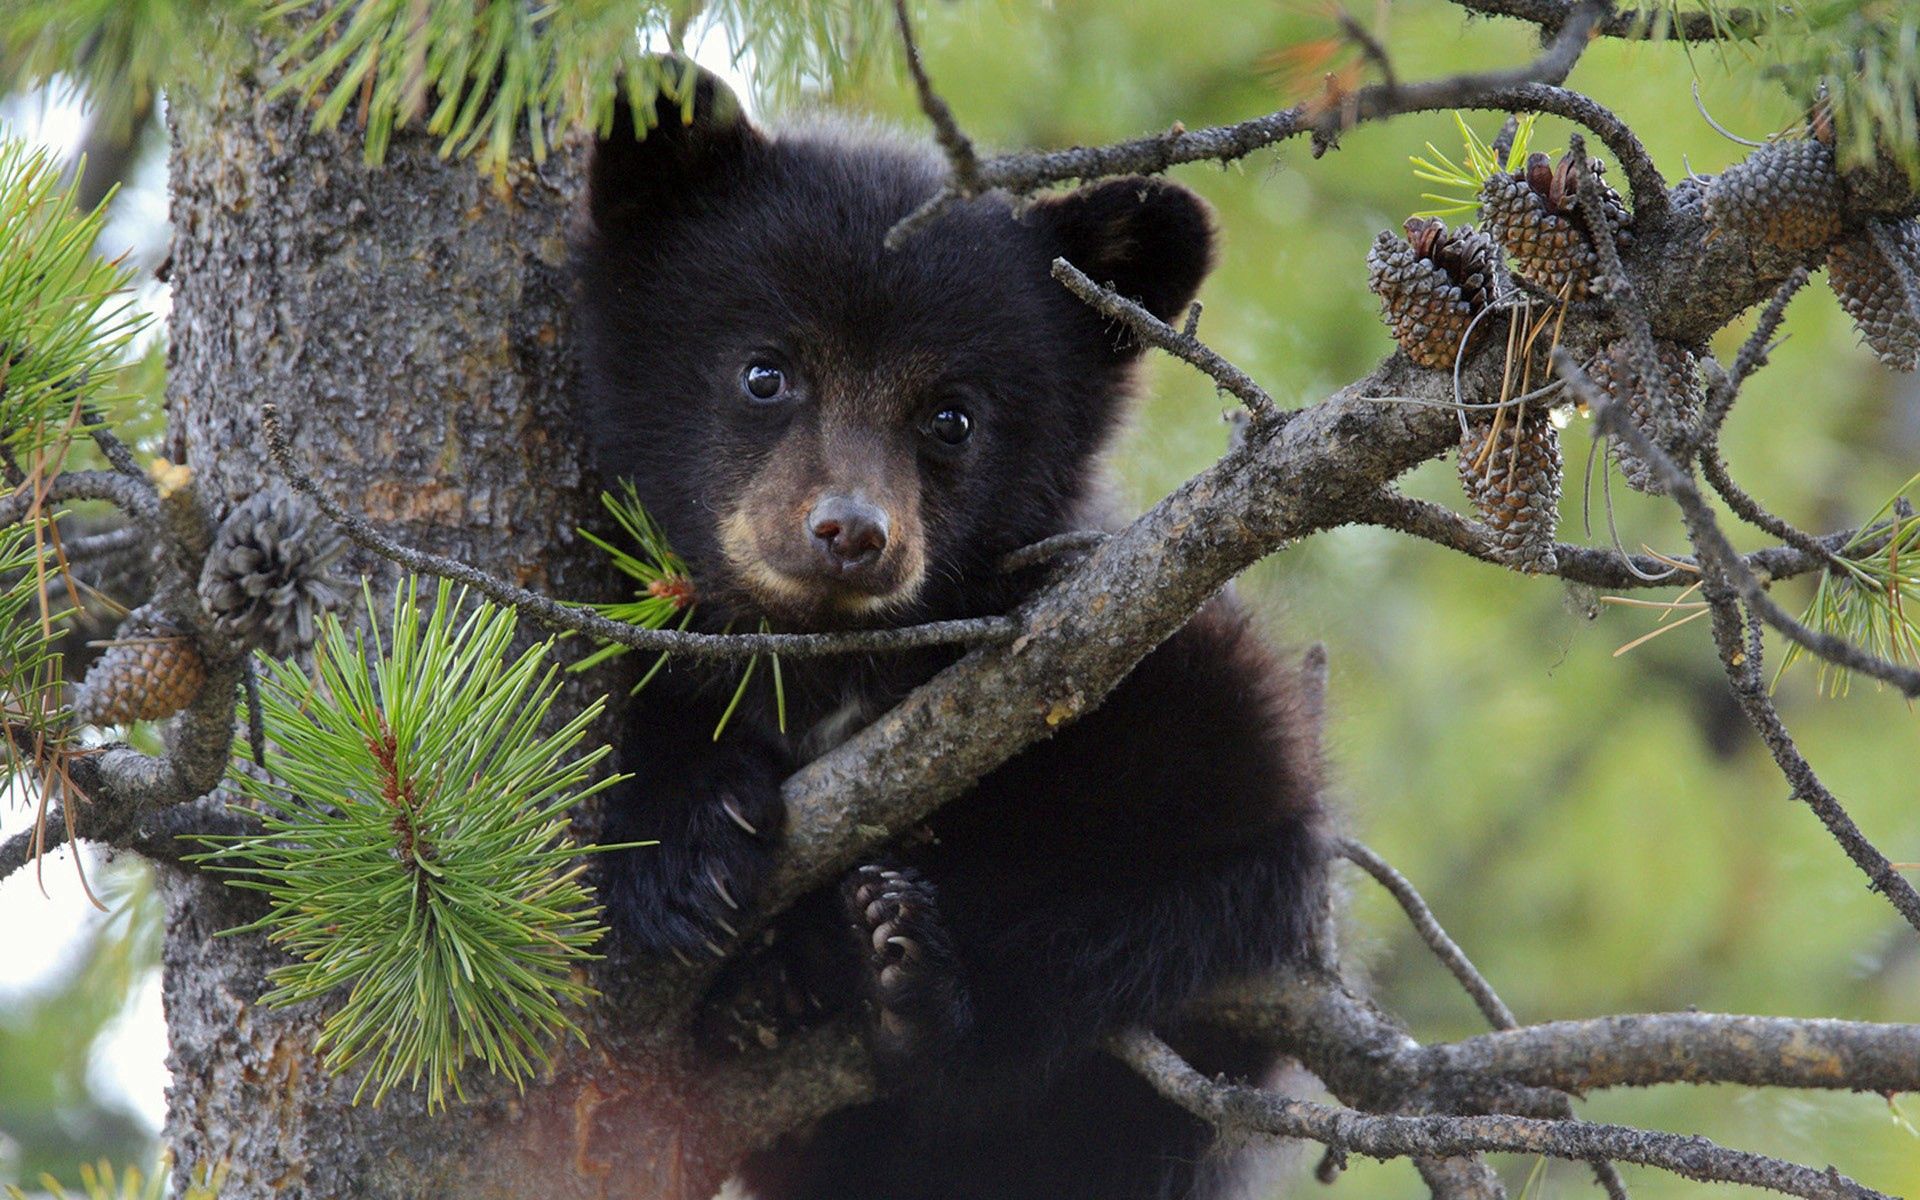 animals, wood, young, tree, branches, bear, spruce, fir, joey